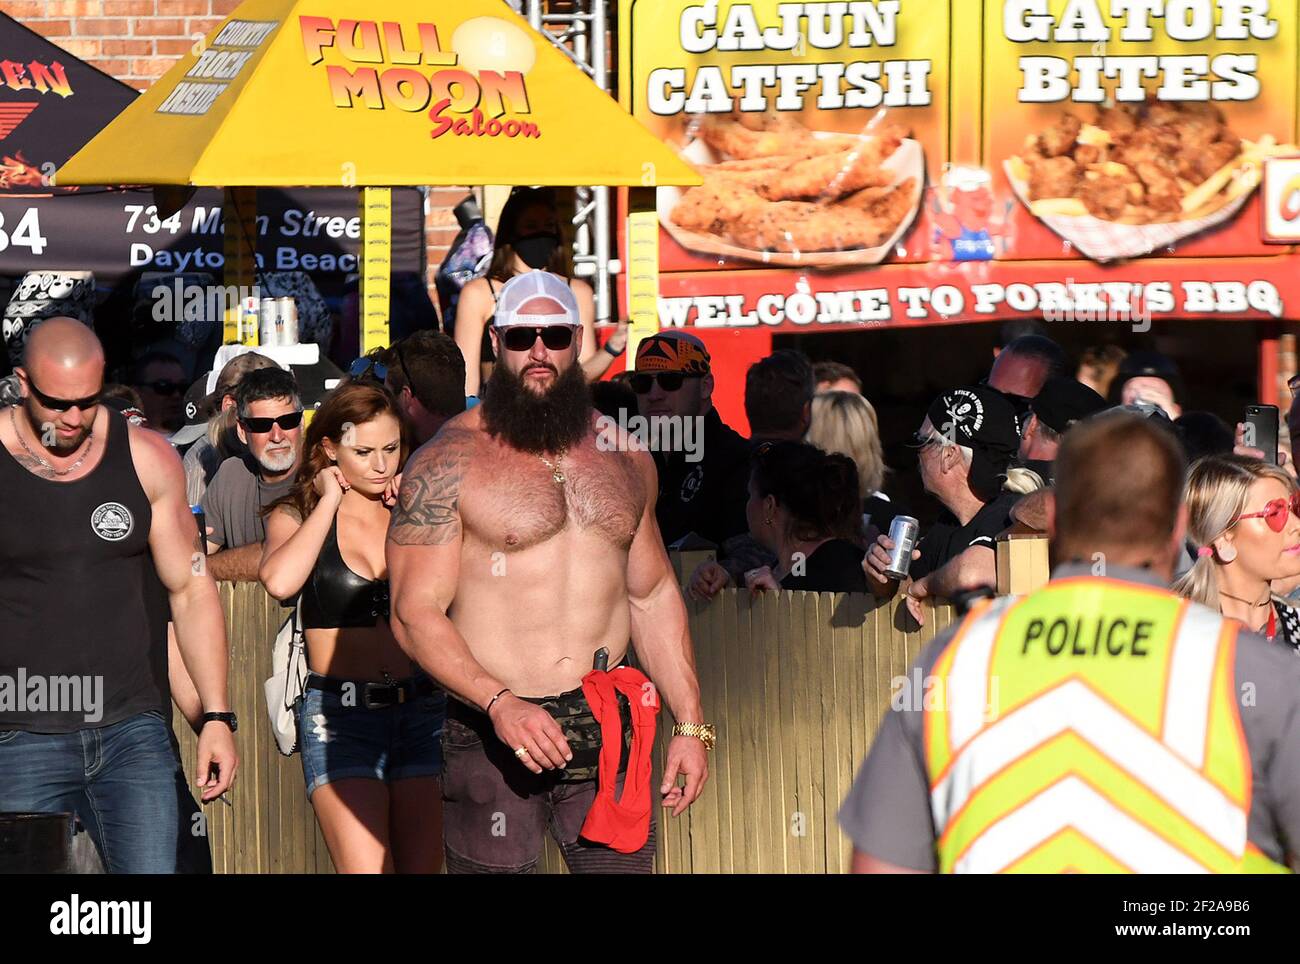 People gather at the Full Moon Saloon on Main Street during the 80th year of Daytona Beach's annual Bike Week event. Few people were seen wearing face masks or practicing social distancing and some worry the gathering could become a superspreader event as the coronavirus pandemic continues. (Photo by Paul Hennessy / SOPA Images/Sipa USA) Stock Photo